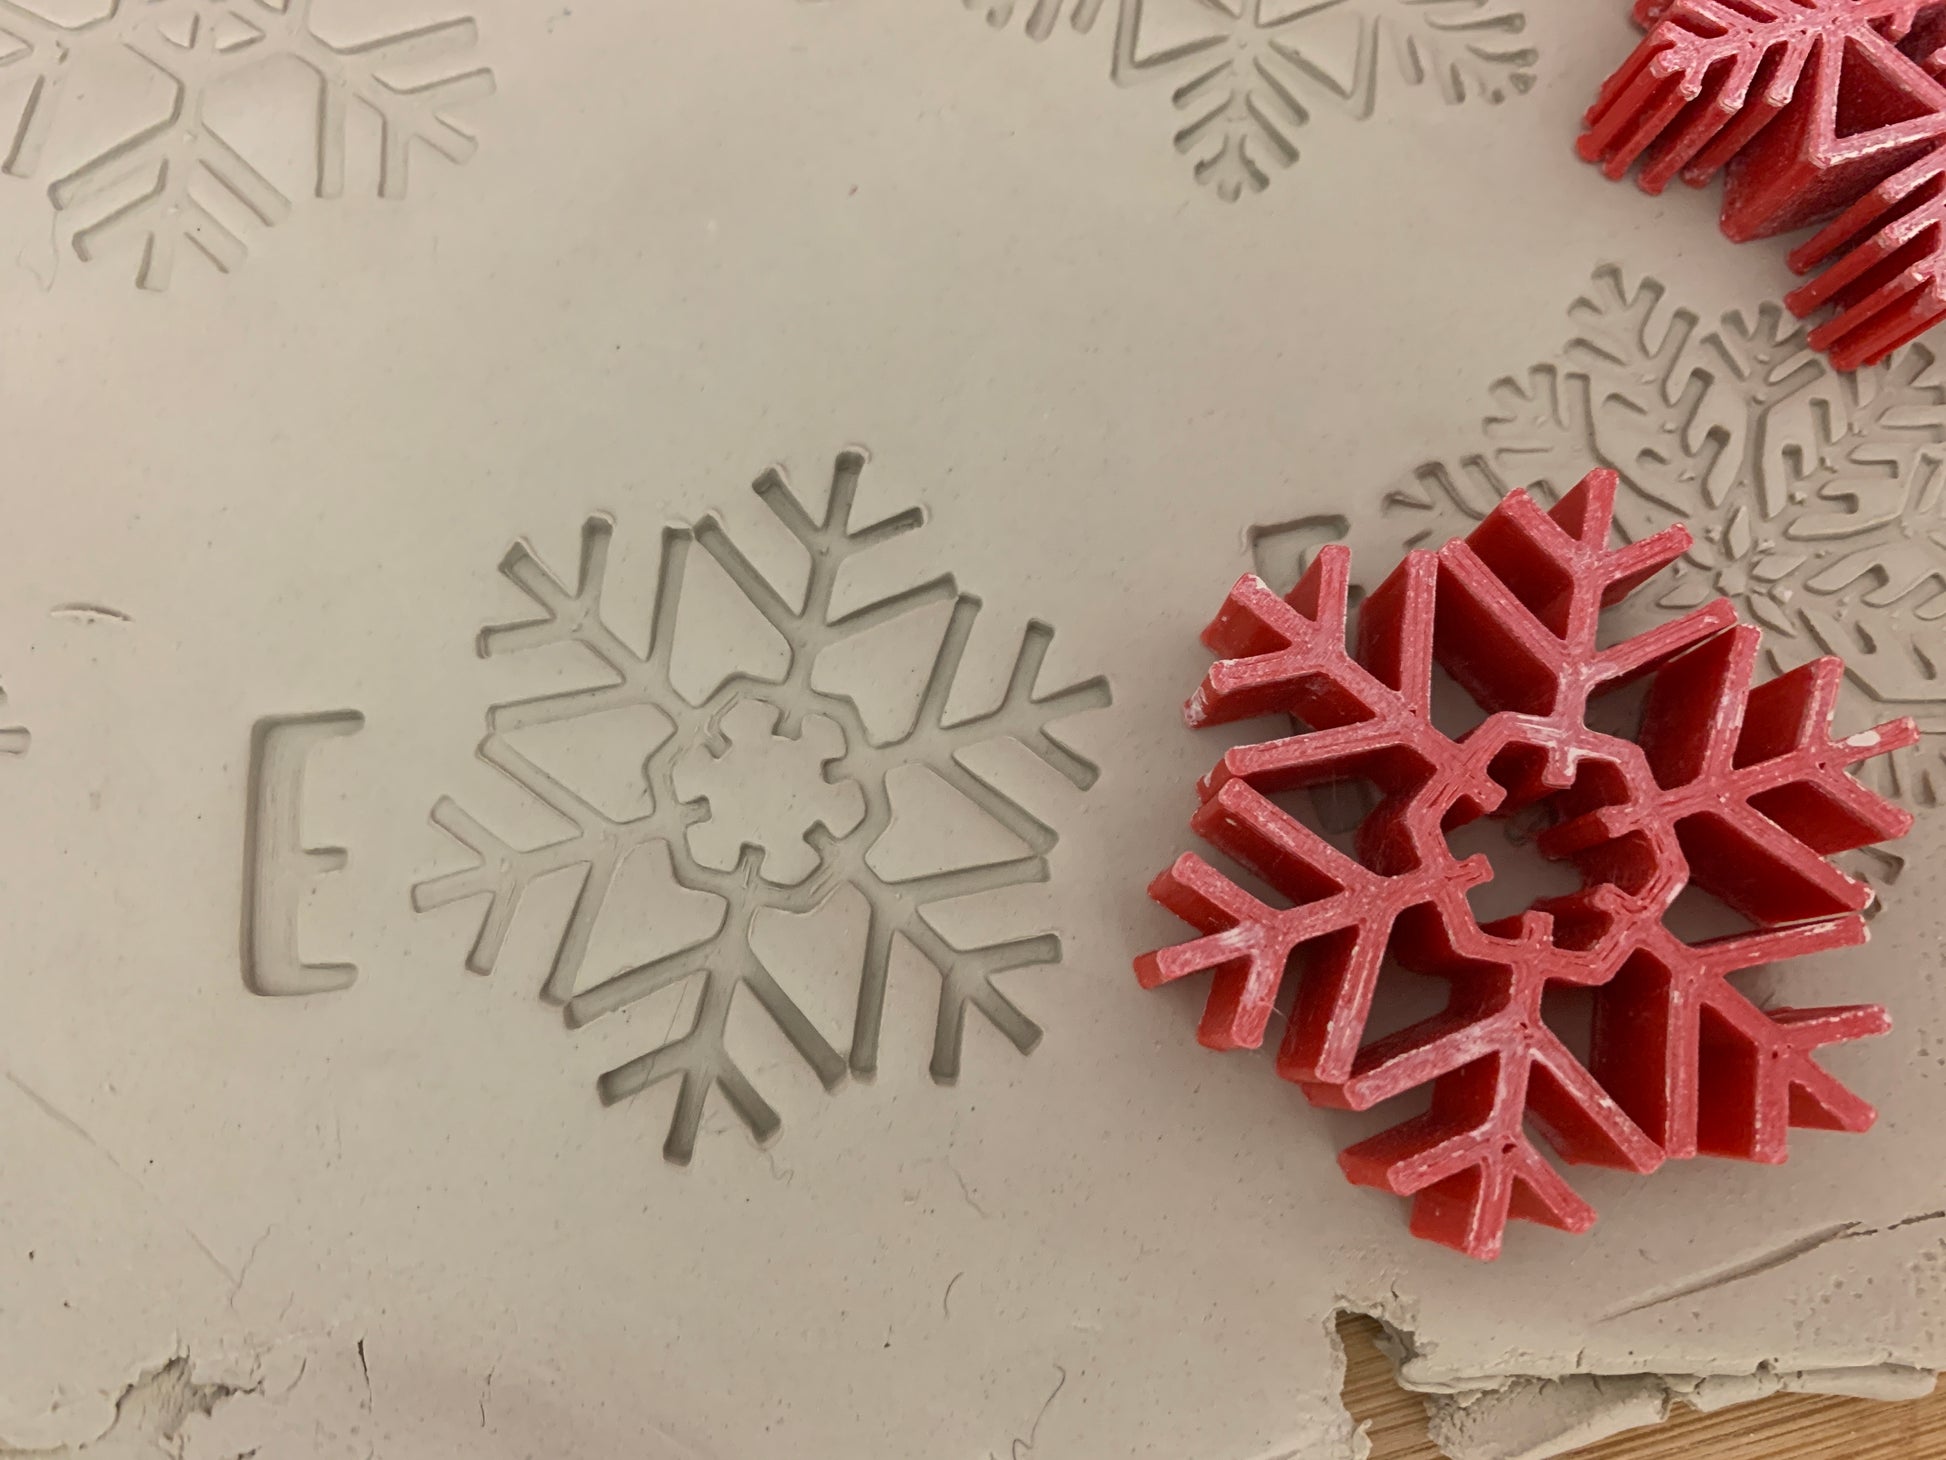 Snowflakes, Clay stamps